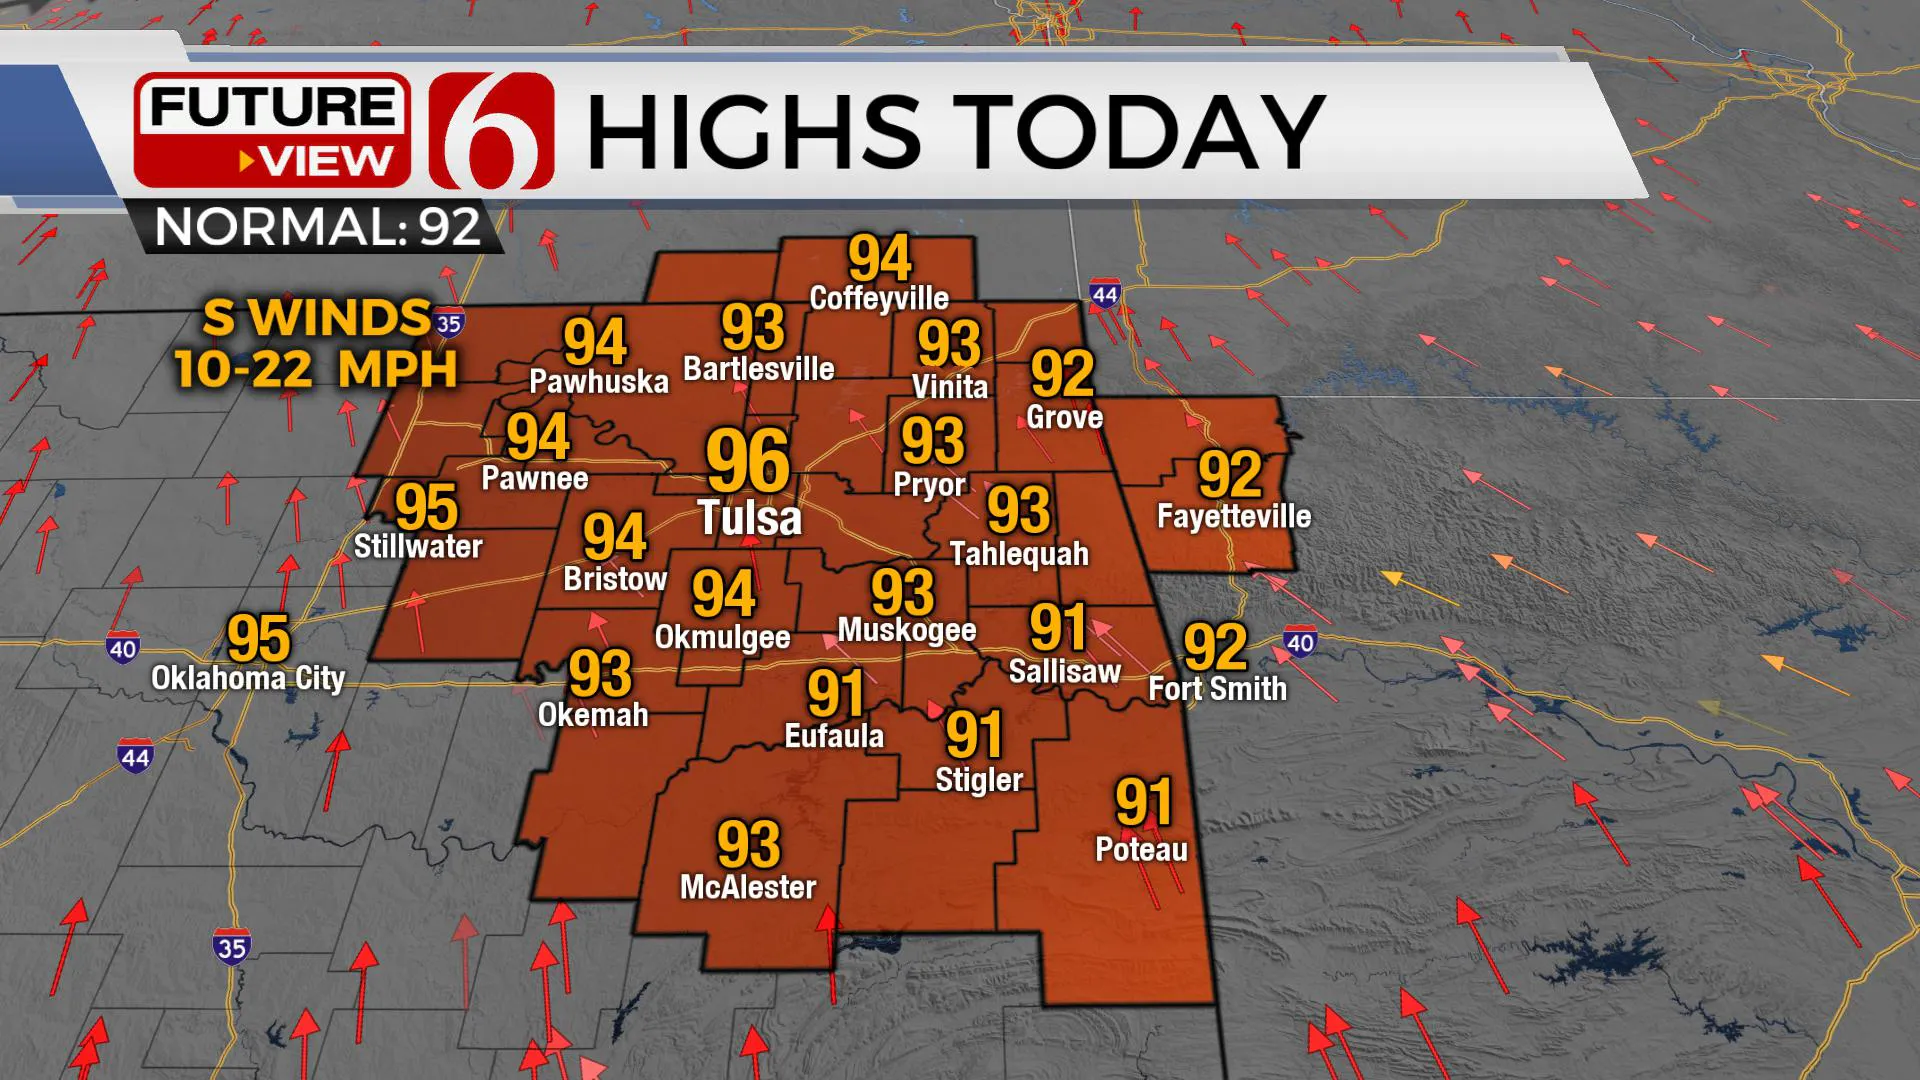 Highs For Wednesday